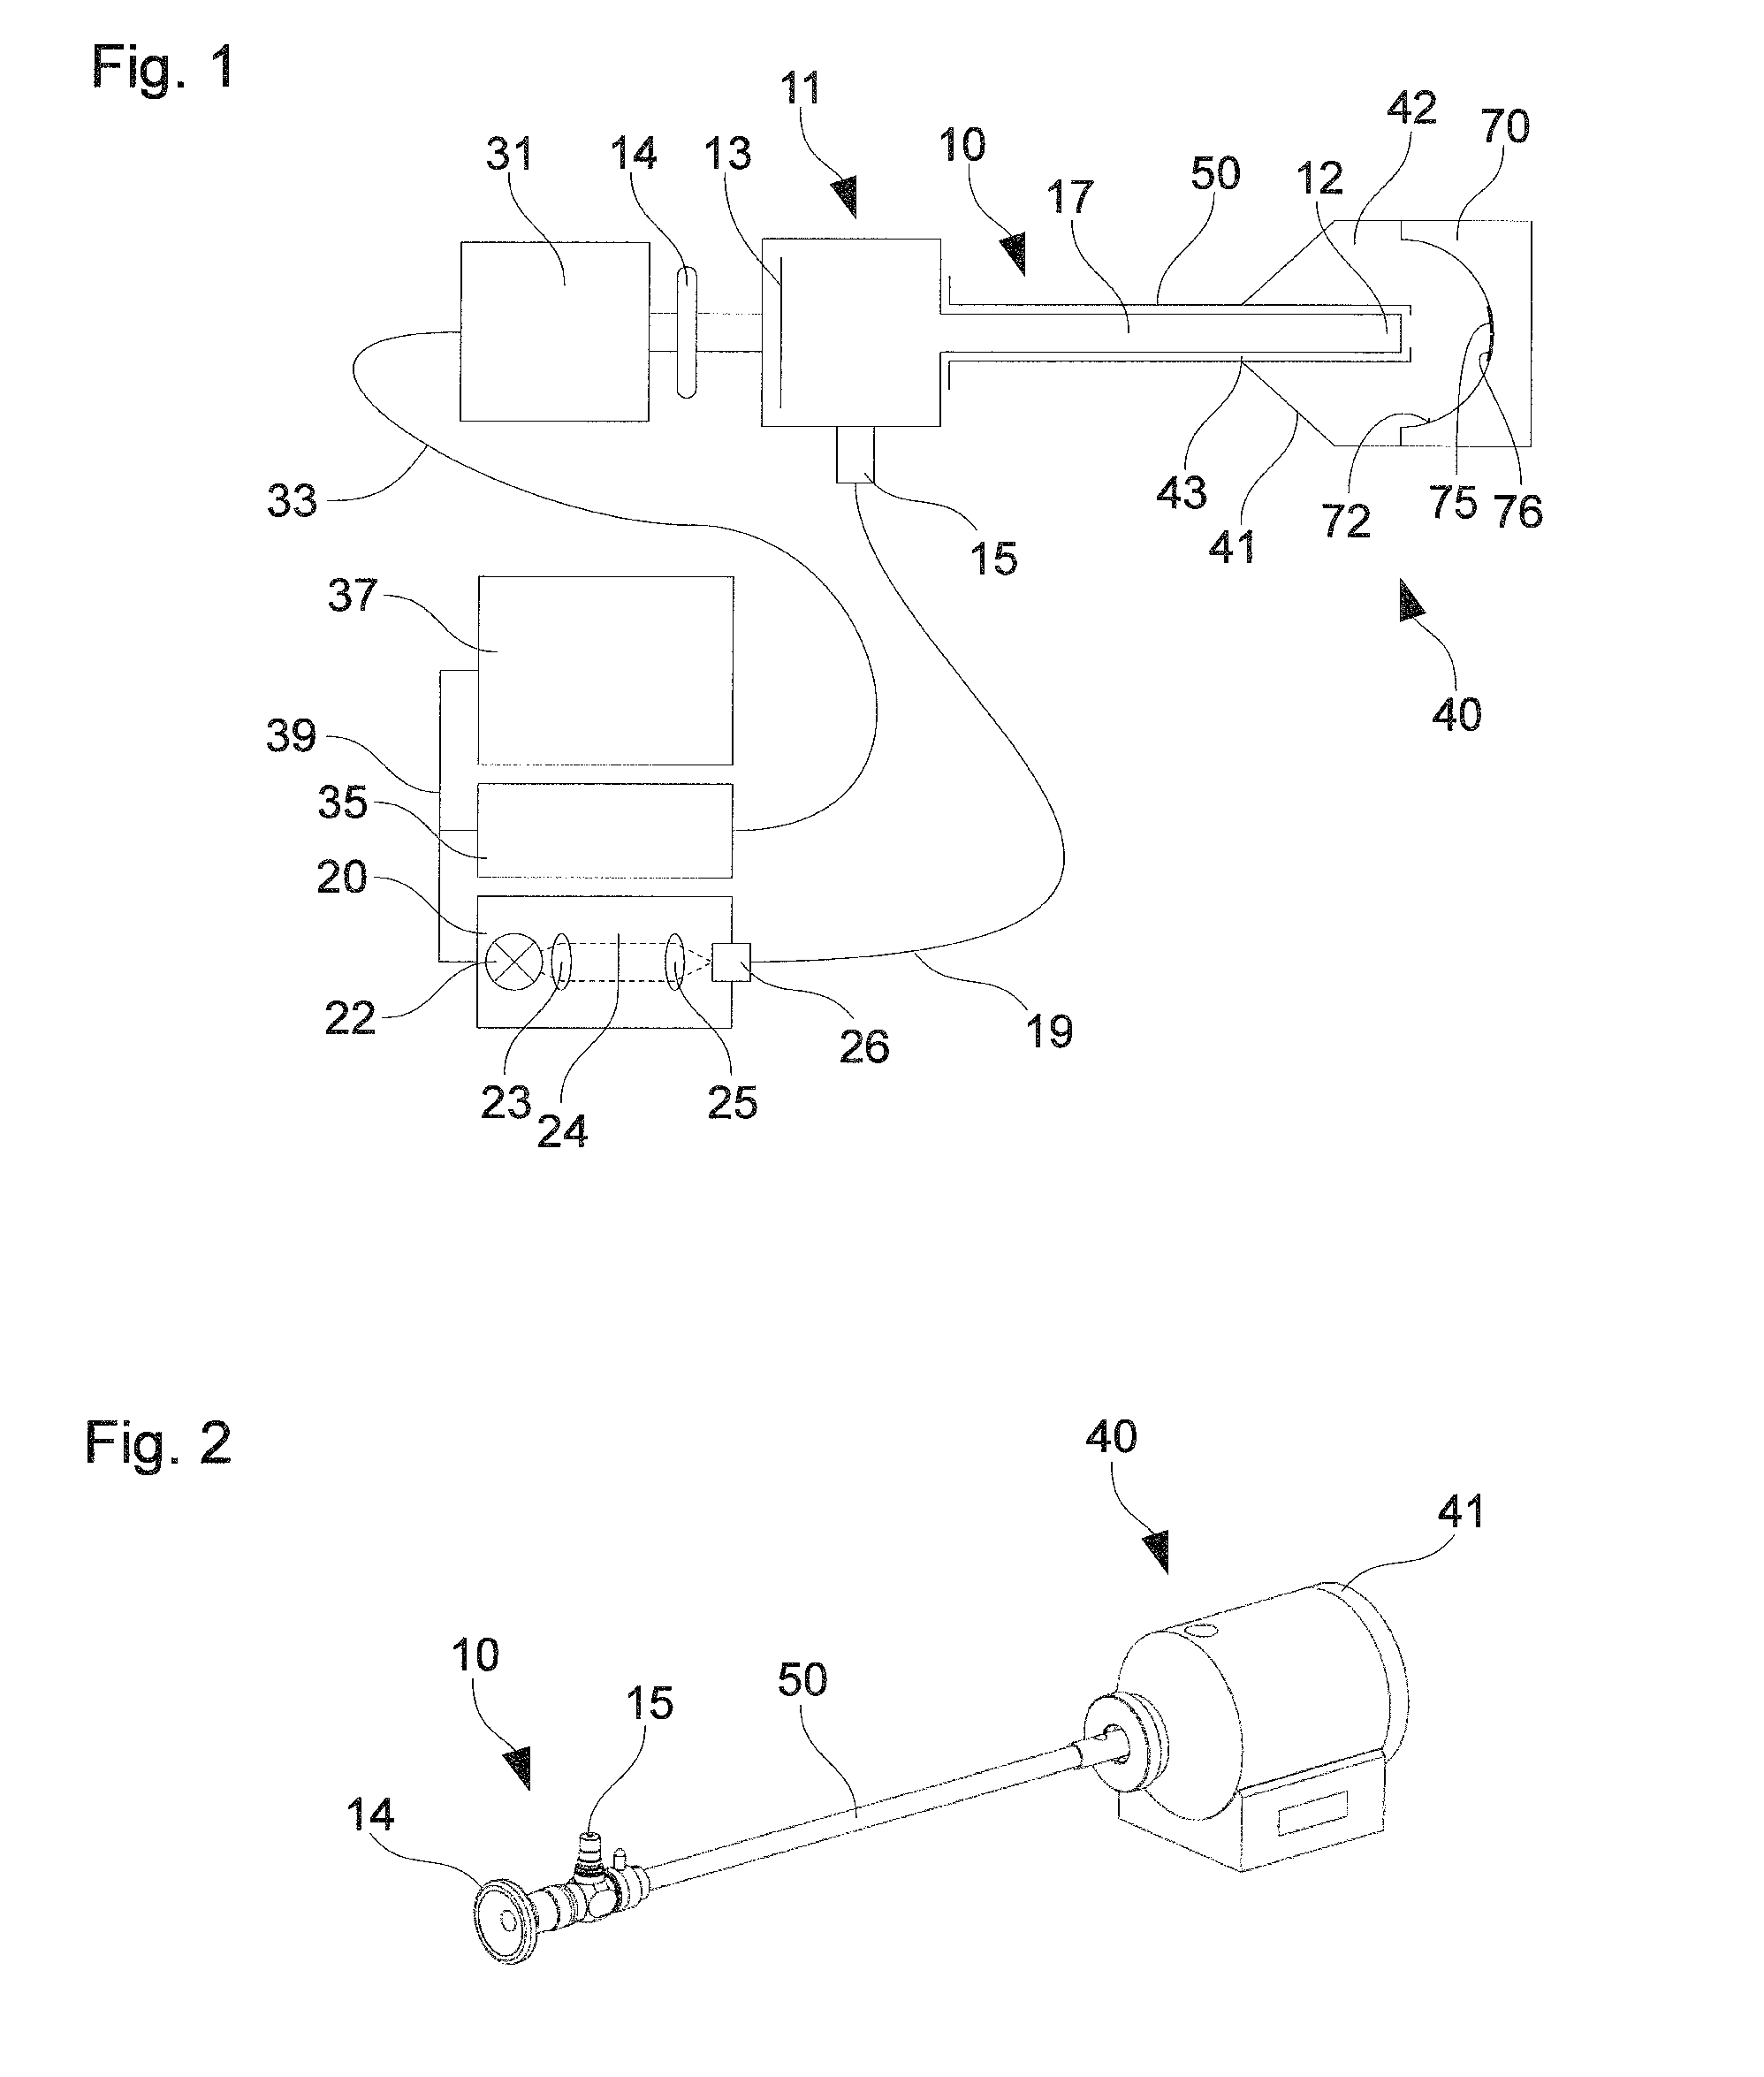 Method for testing an optical investigation system